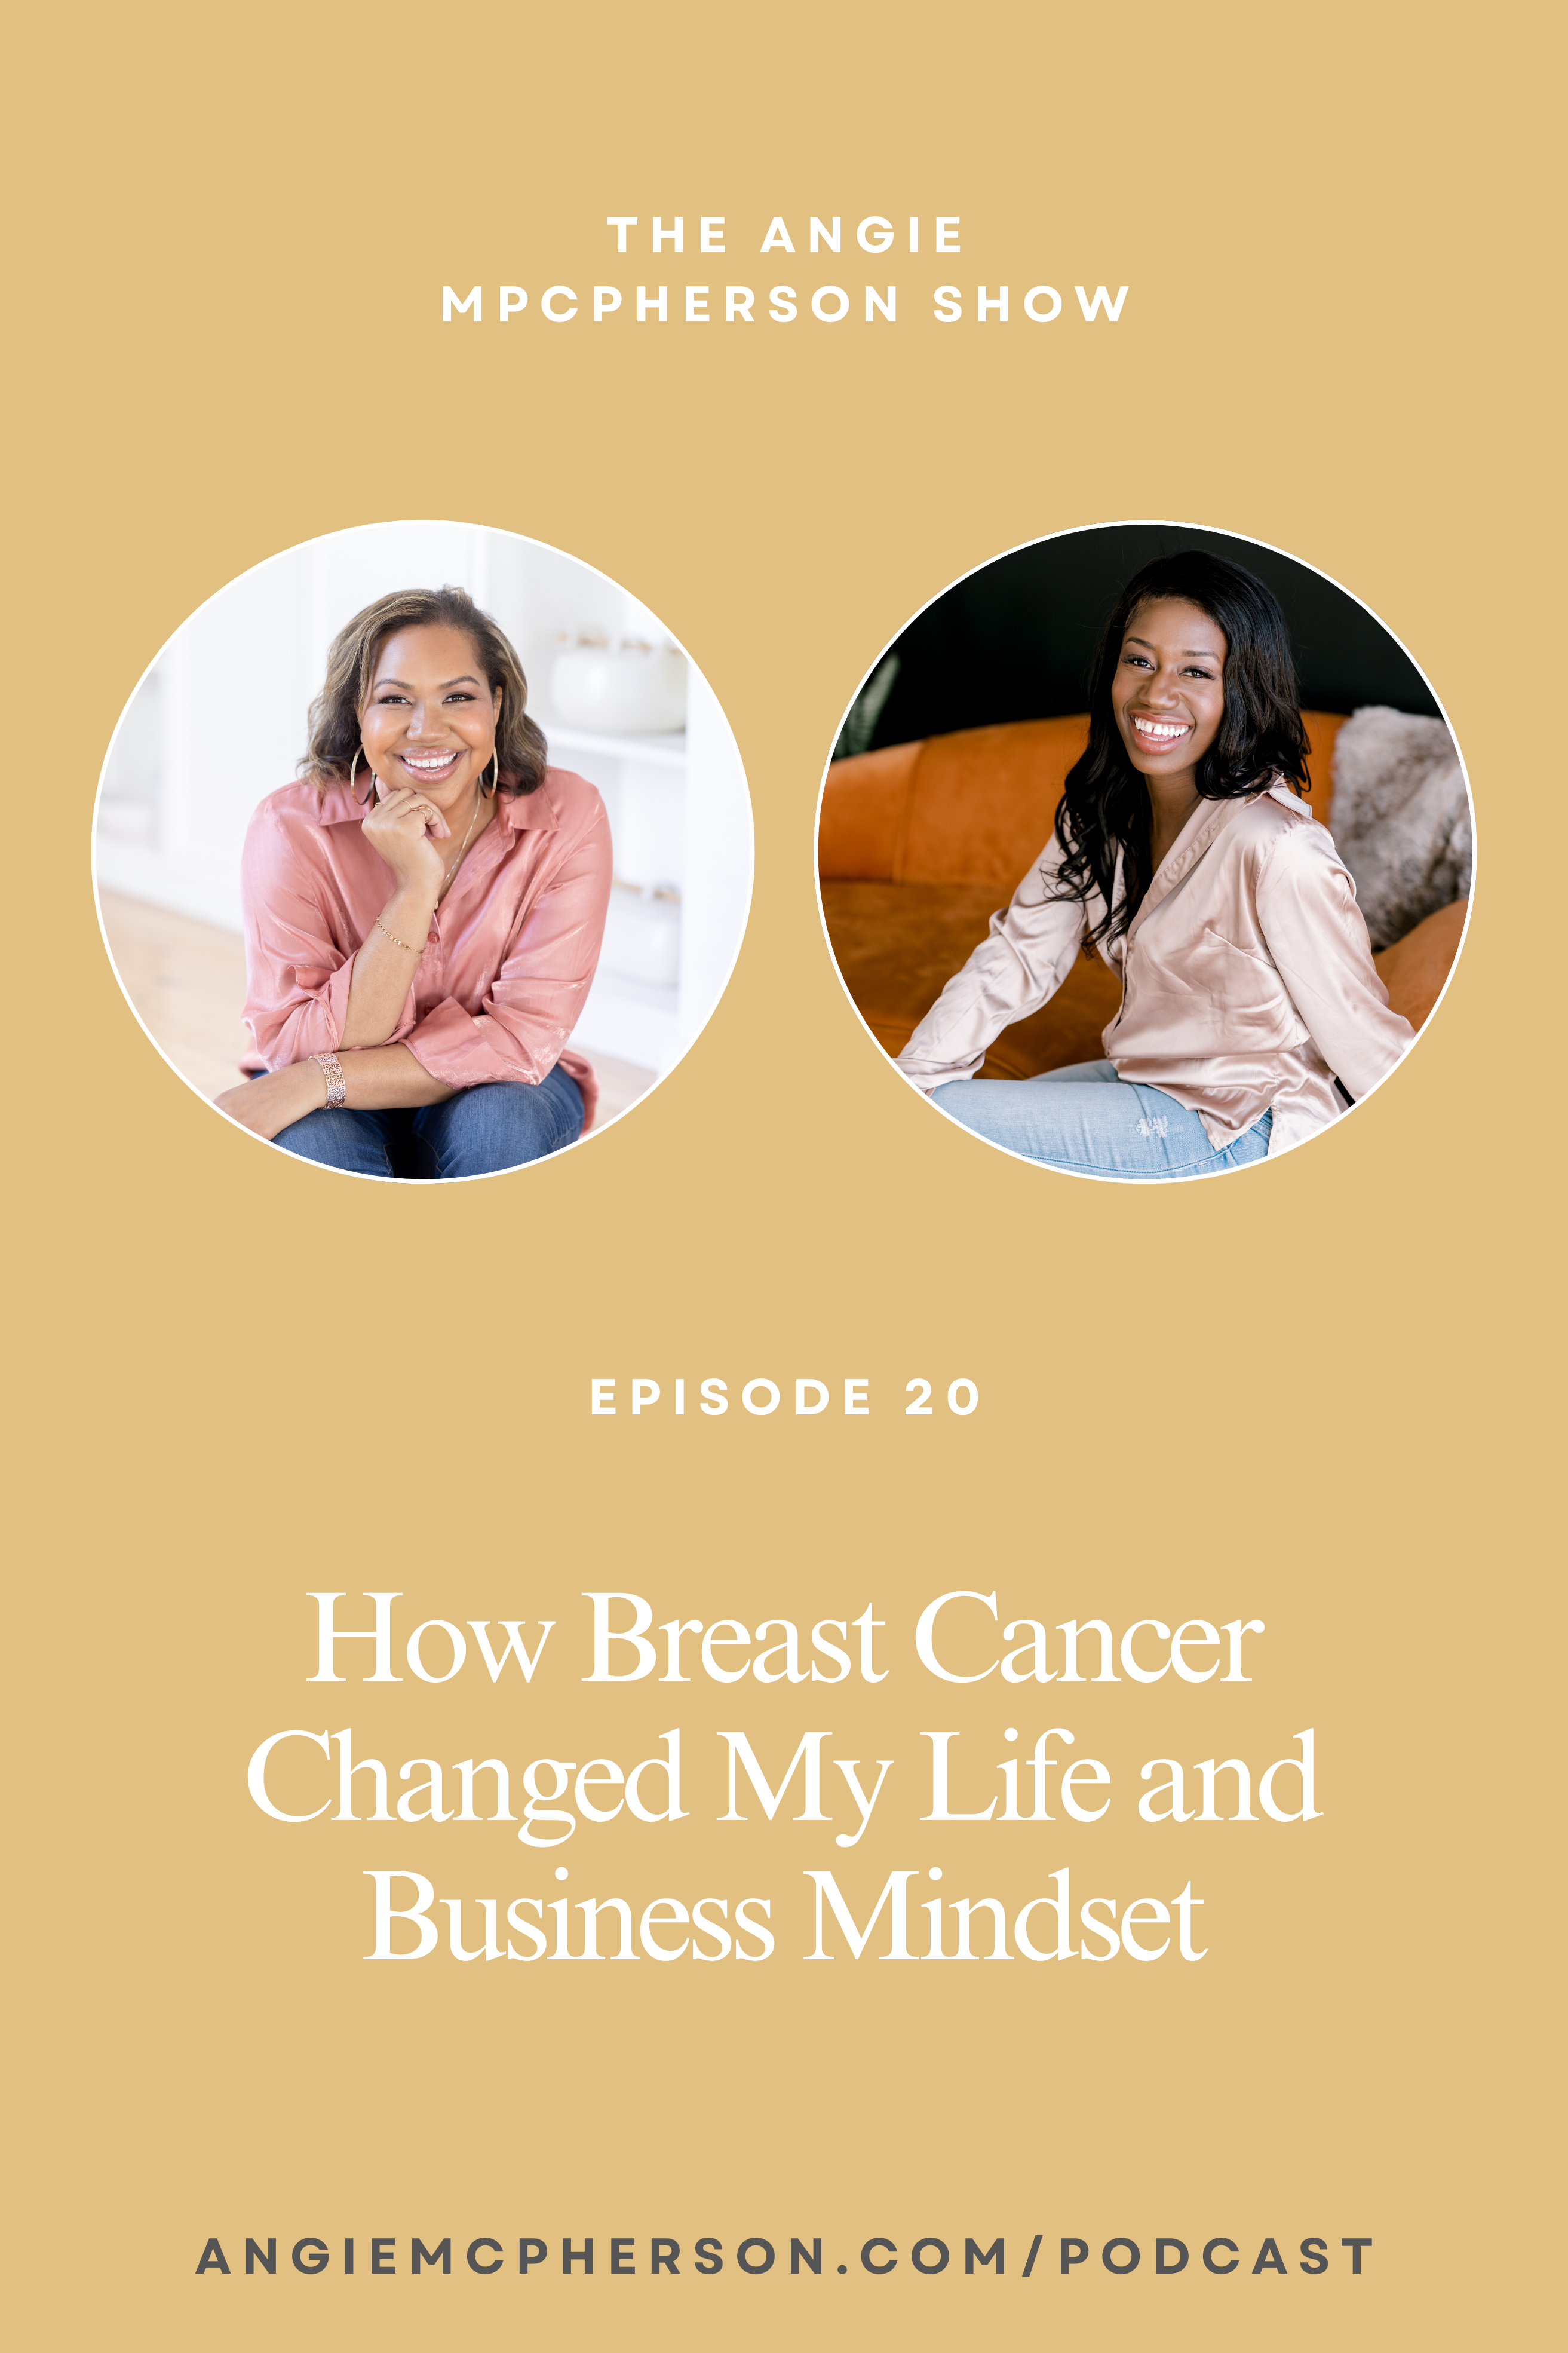 How Breast Cancer Changed My Life and Business Mindset with Angie McPherson